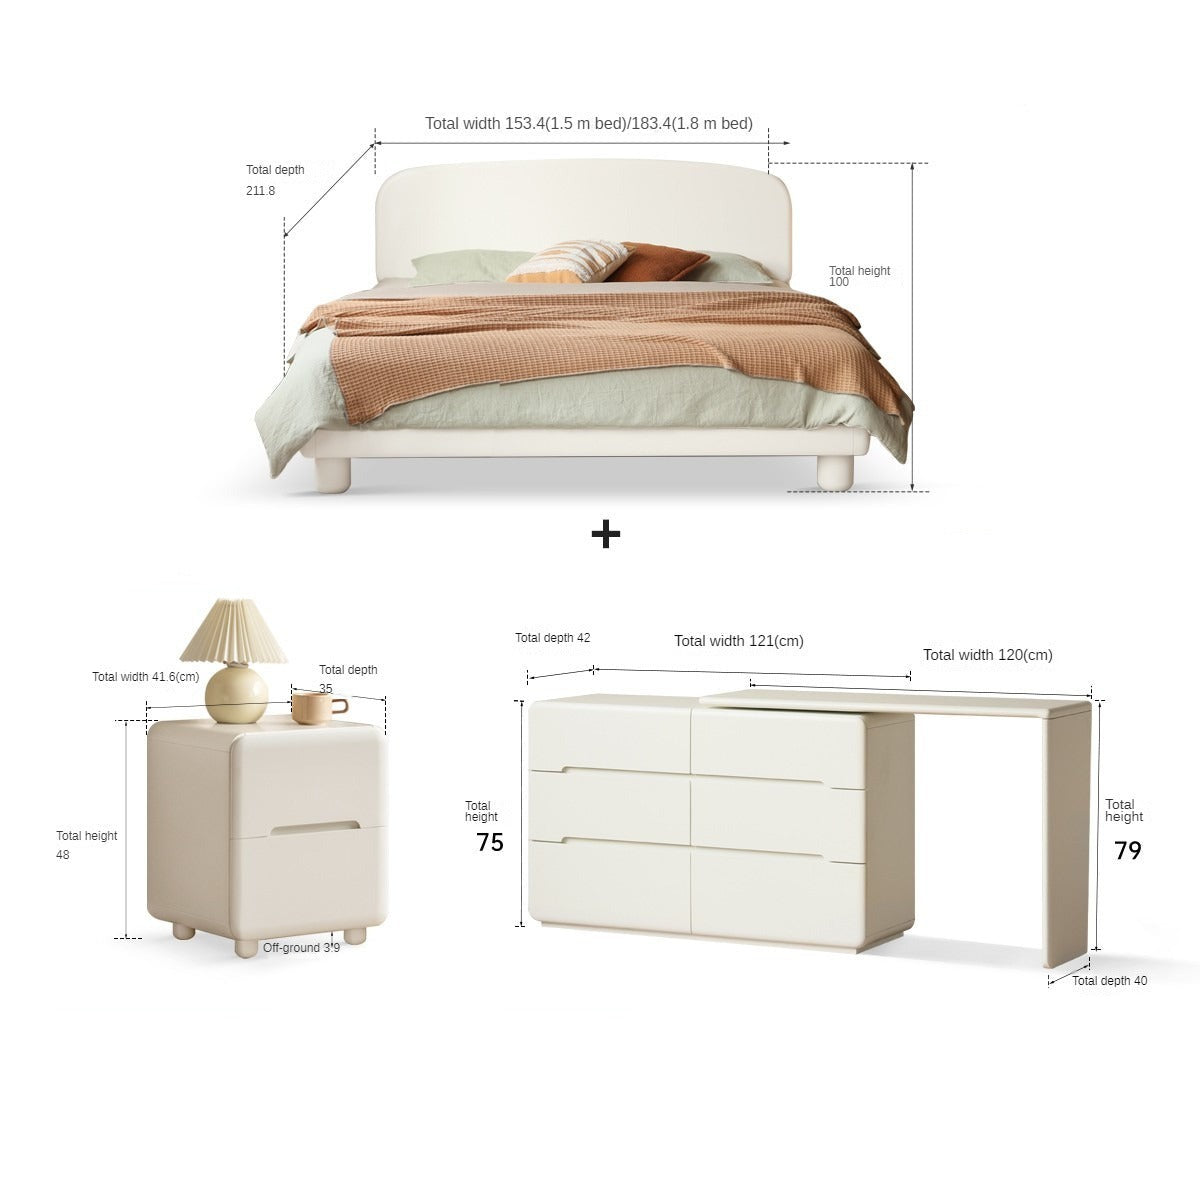 Poplar solid wood French cream style bed_)